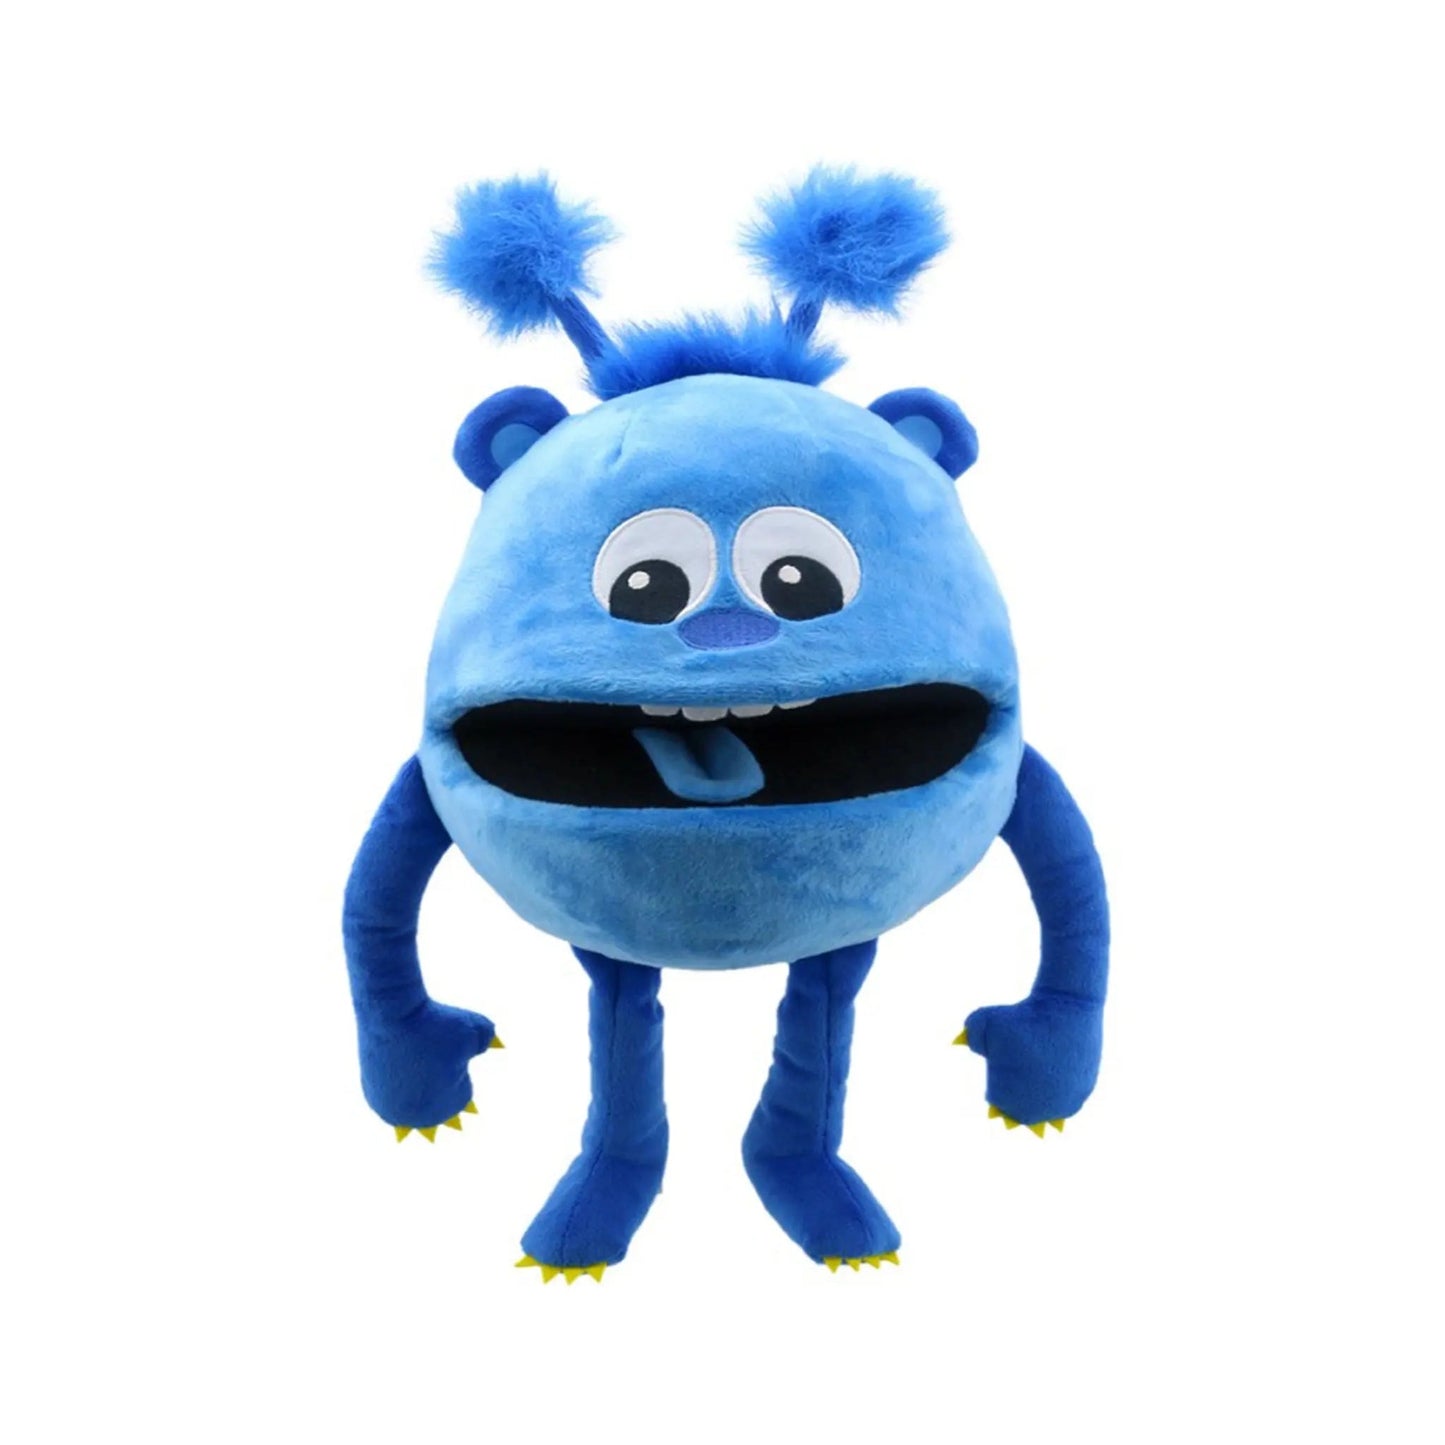 Baby Monster Puppet - Blue - The Puppet Company - The Forgotten Toy Shop